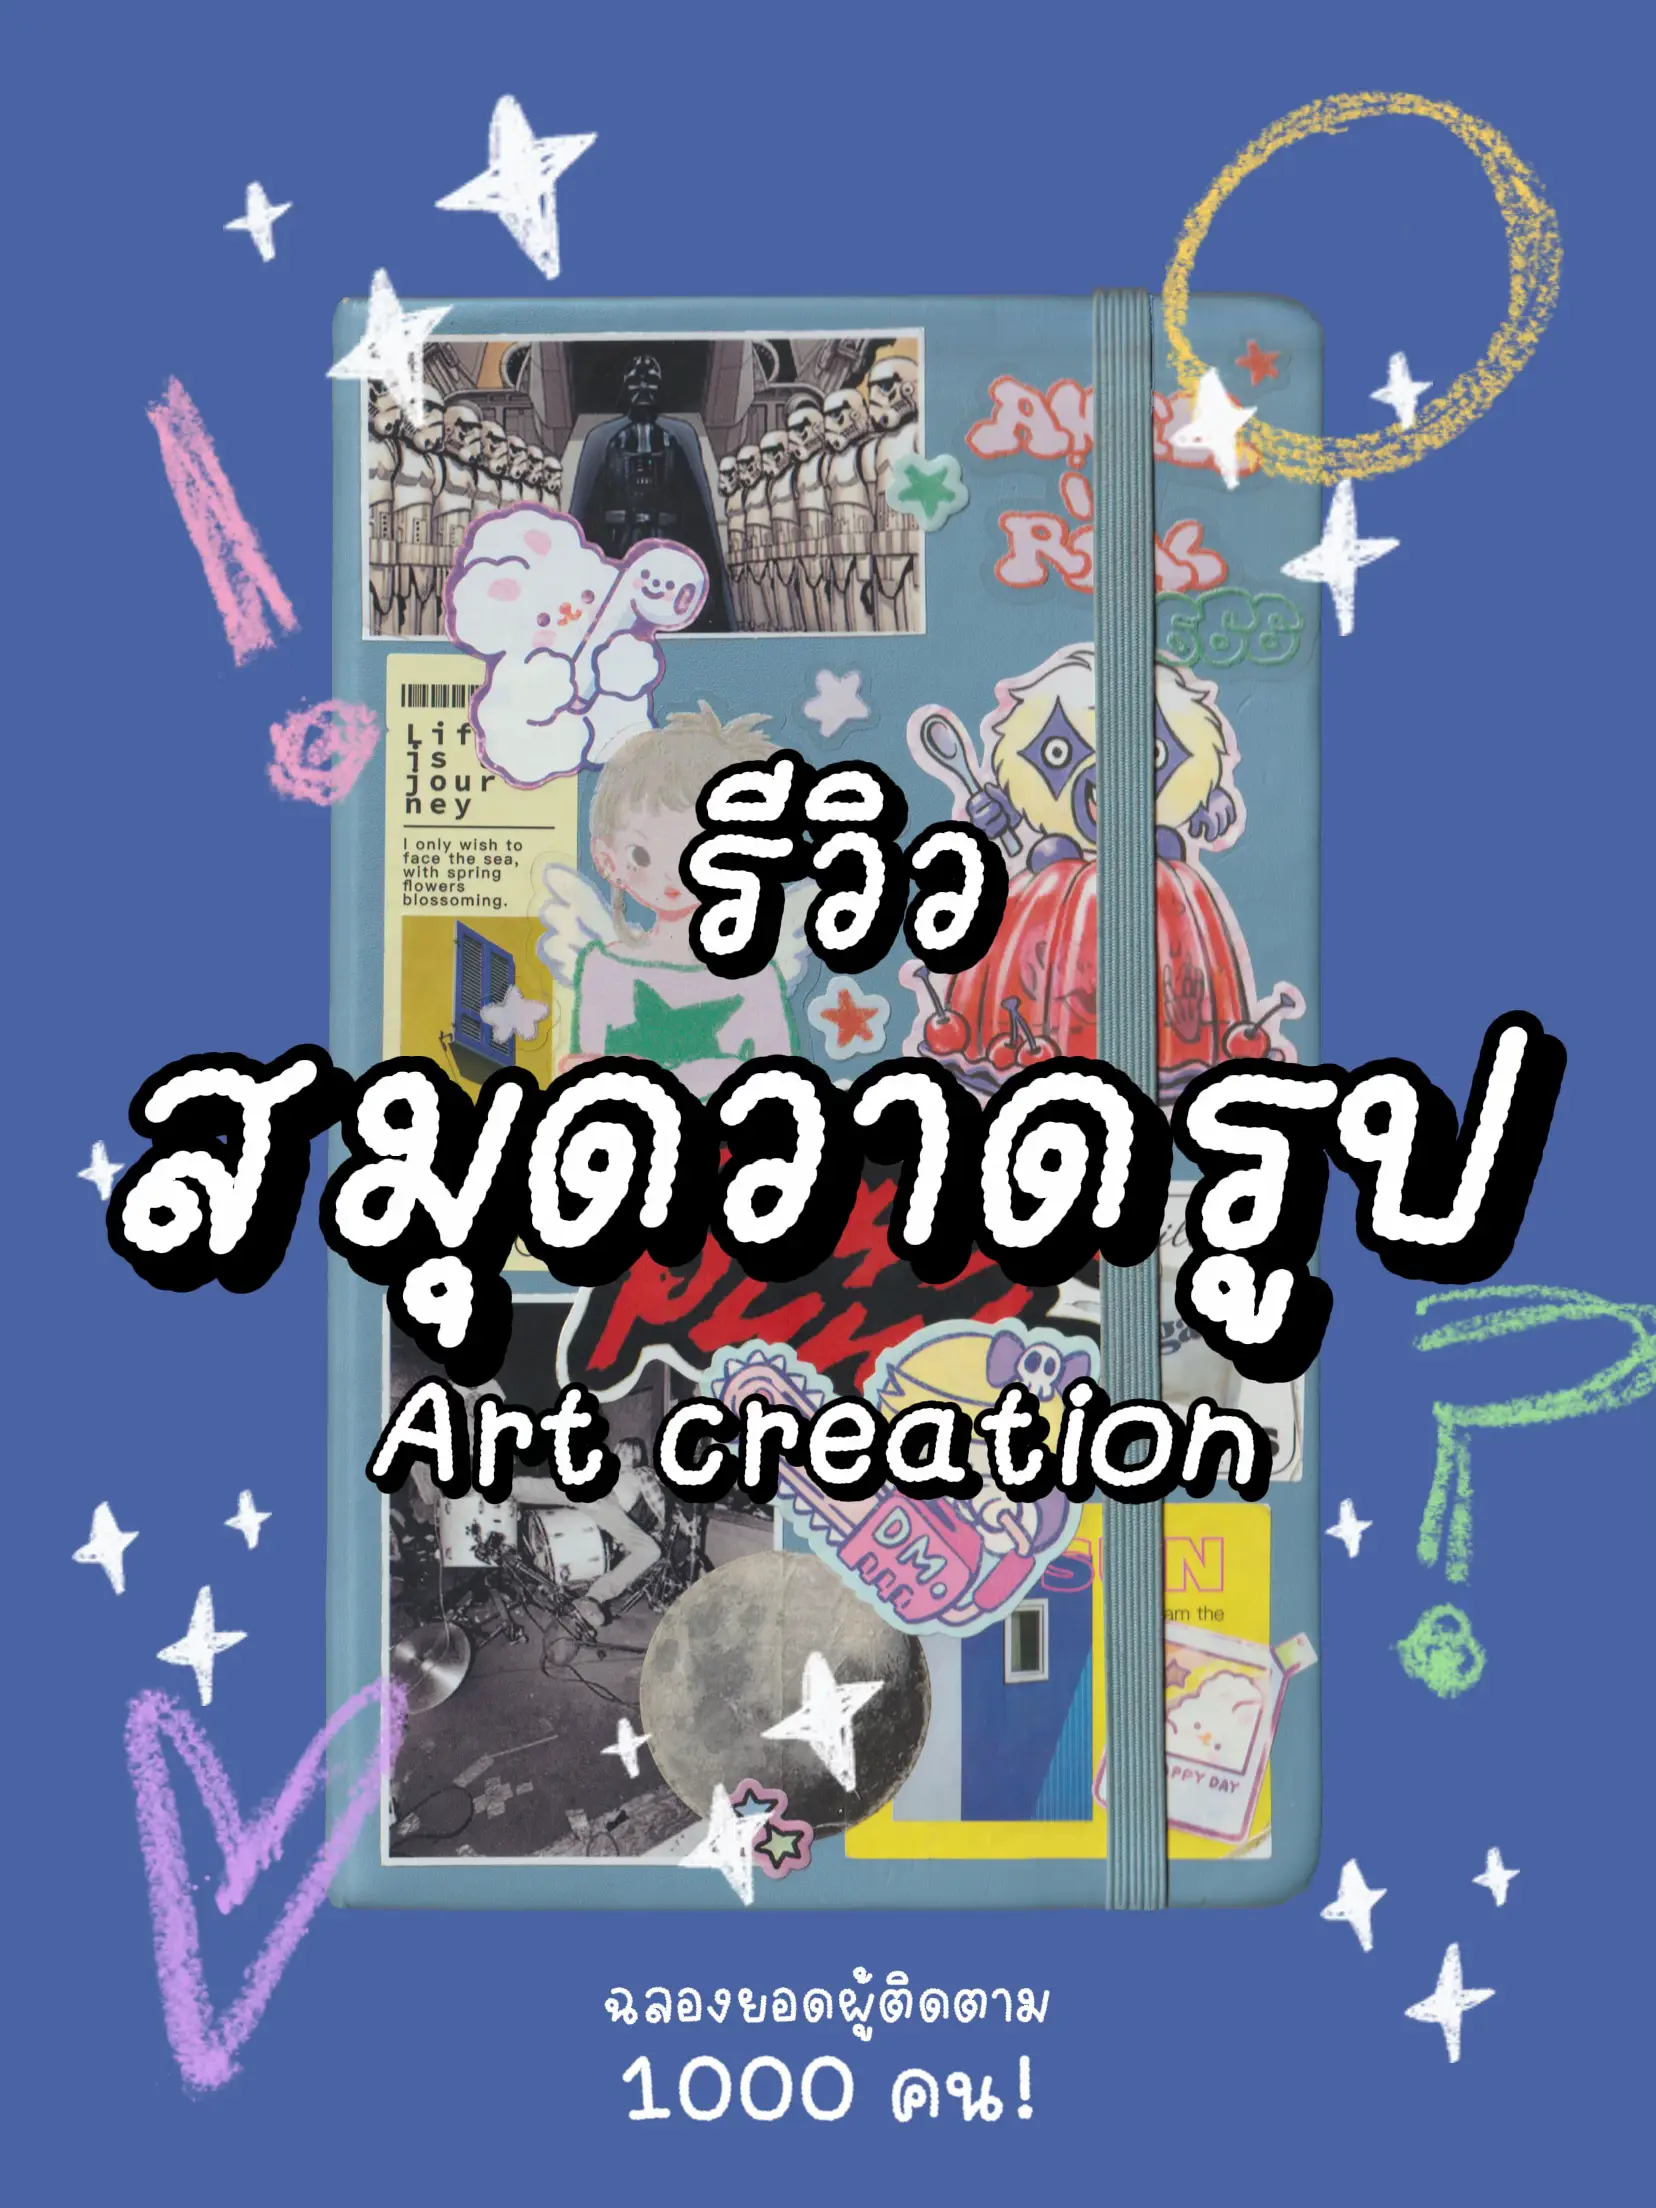 Talens Art Creation Sketchbook First Impressions Review 